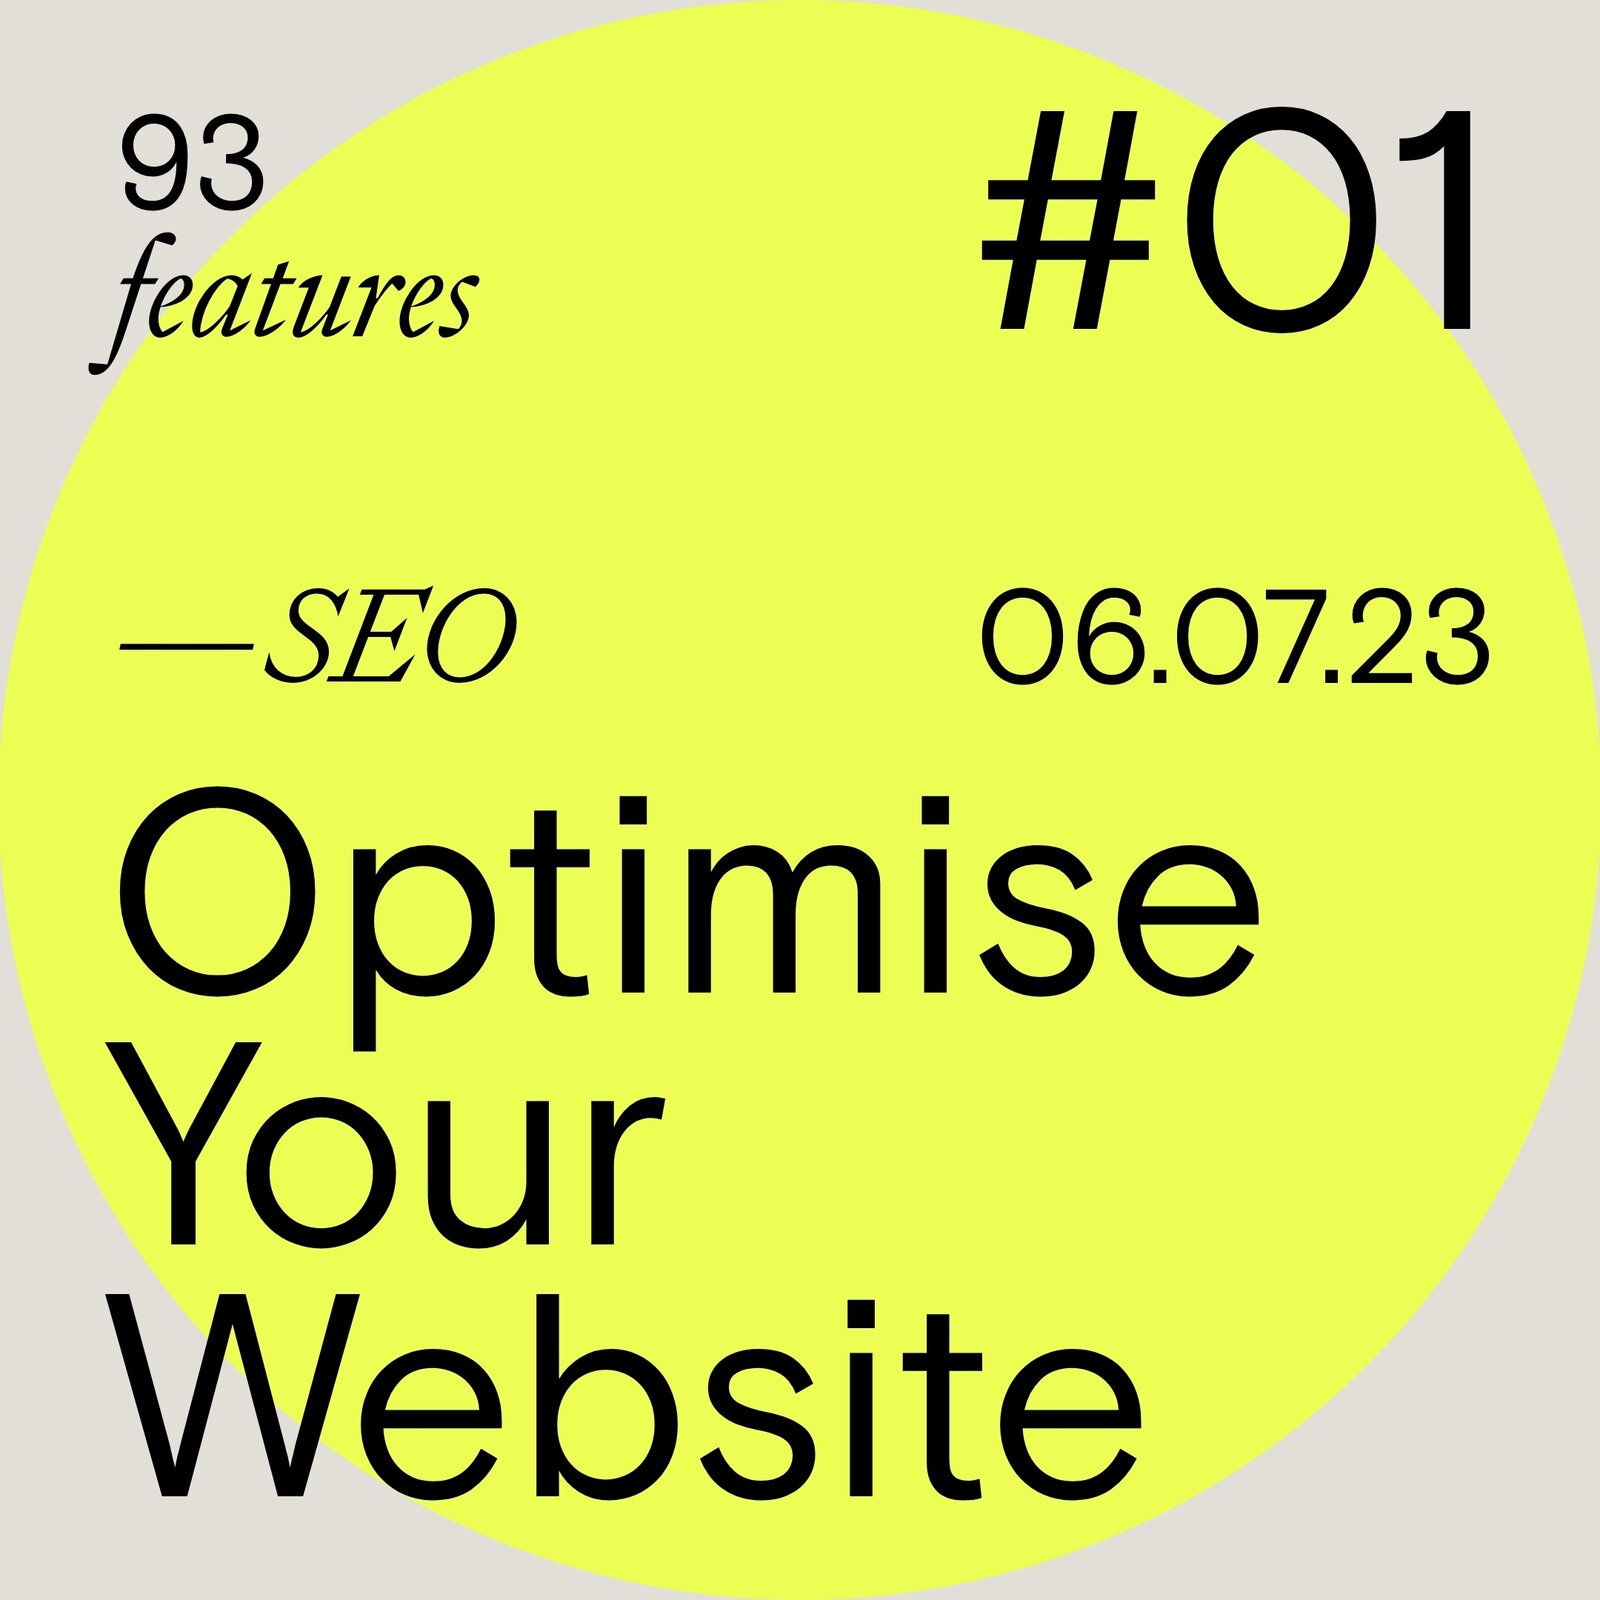 93 features SEO - Optimise your website, elevate your business